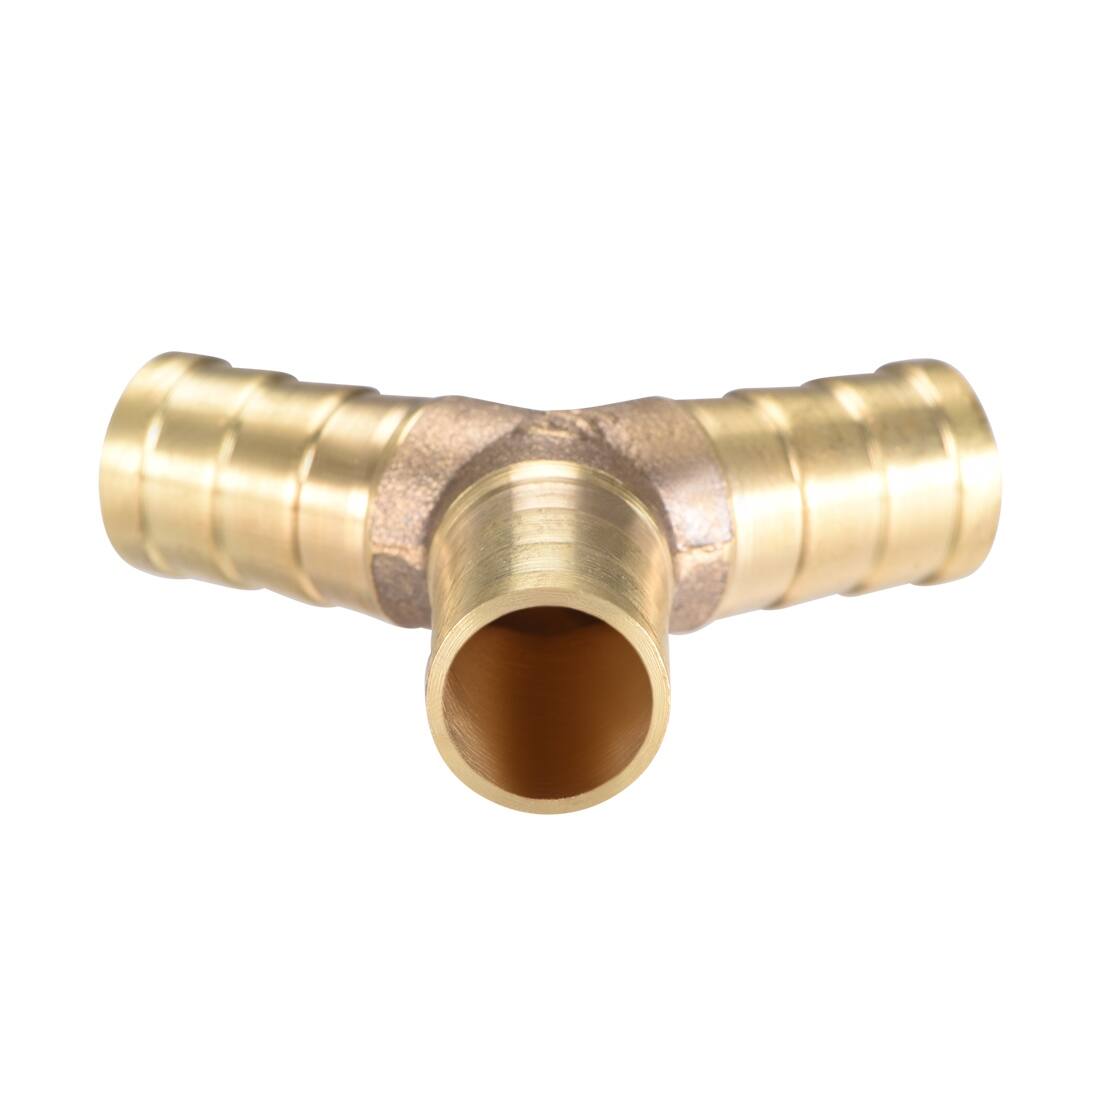 15/32"Brass Barb Hose Fitting Tee Y-Shaped 3 Ways Connector Adapter Joiner 2pcs - Gold Tone - 12mm 2pcs